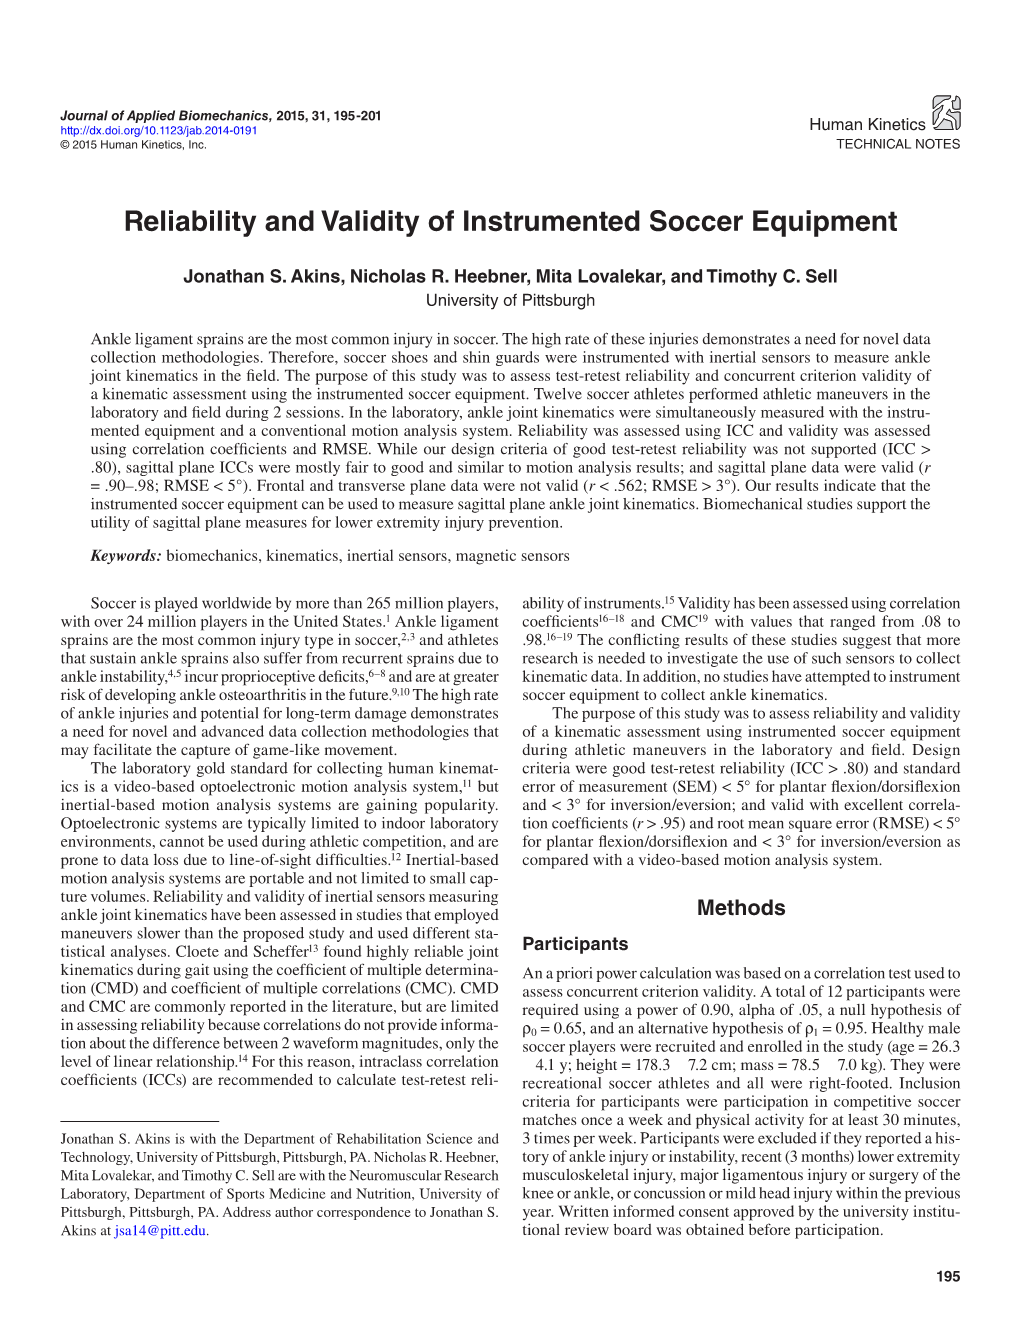 Reliability and Validity of Instrumented Soccer Equipment